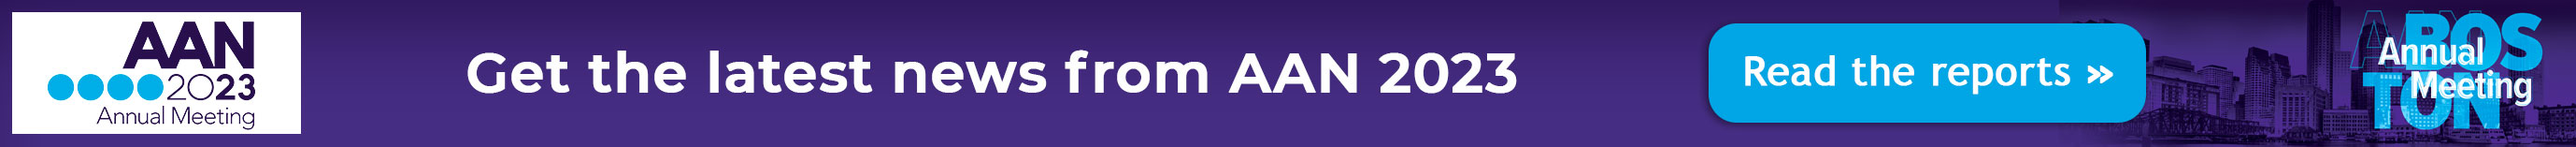 Latest news from AAN2023...Read more 